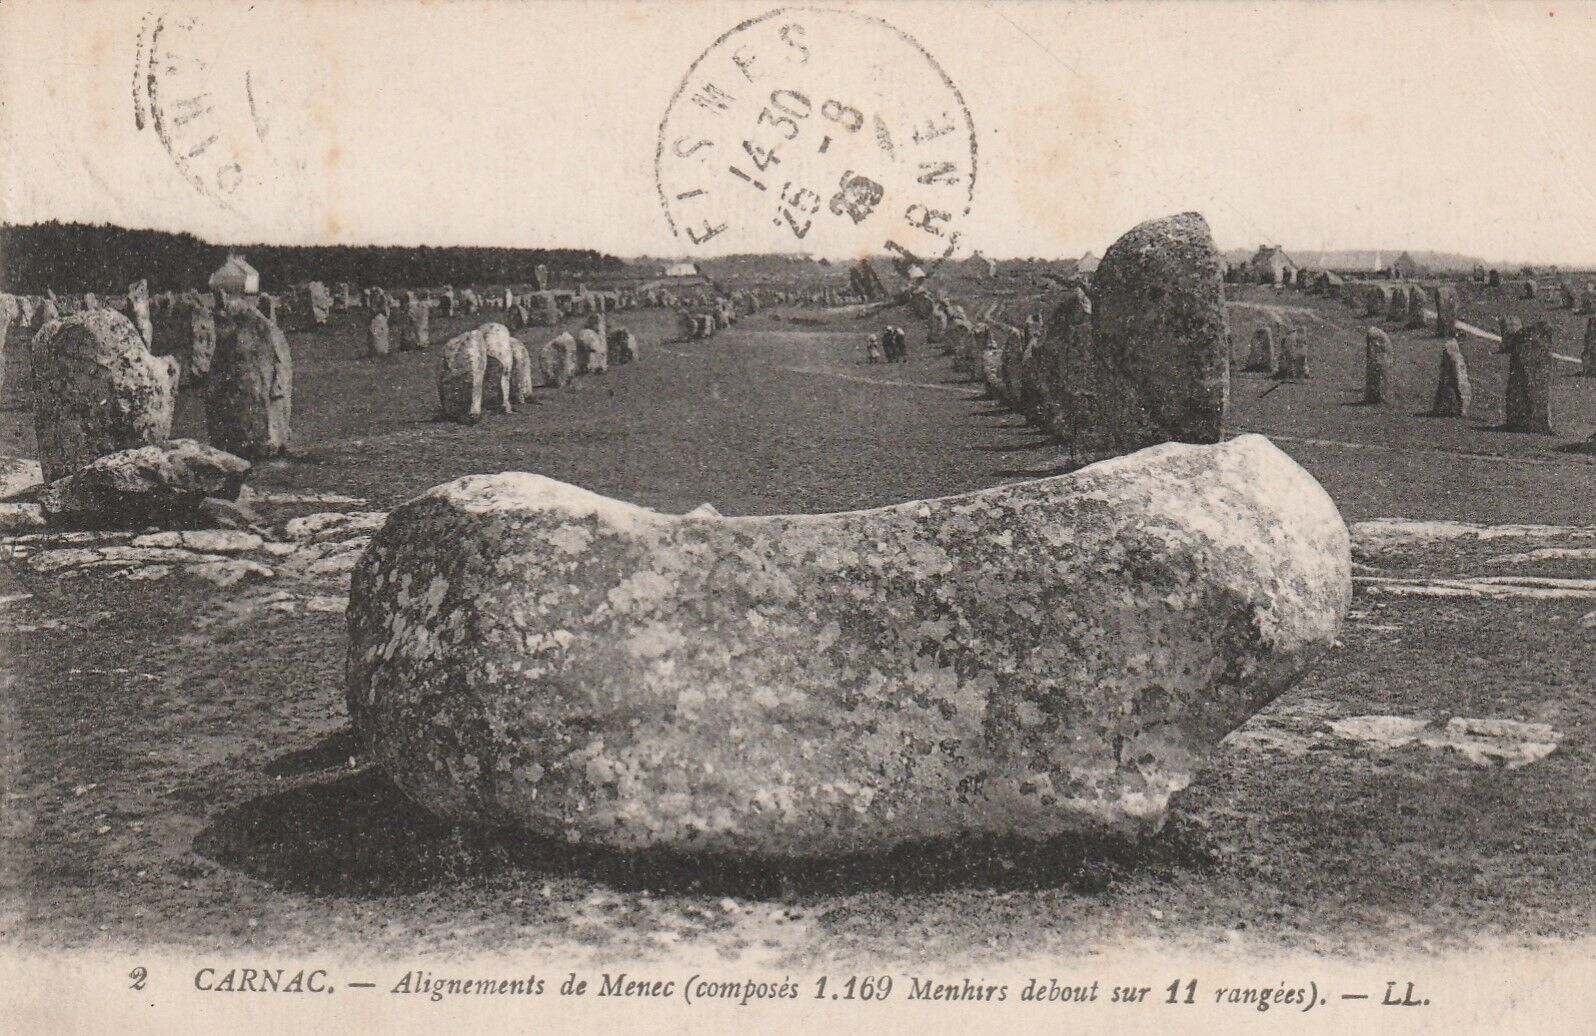 CPA 56 CARNAC Menec Alignments (composed of 1,169 Menhirs Standing on 11 Row